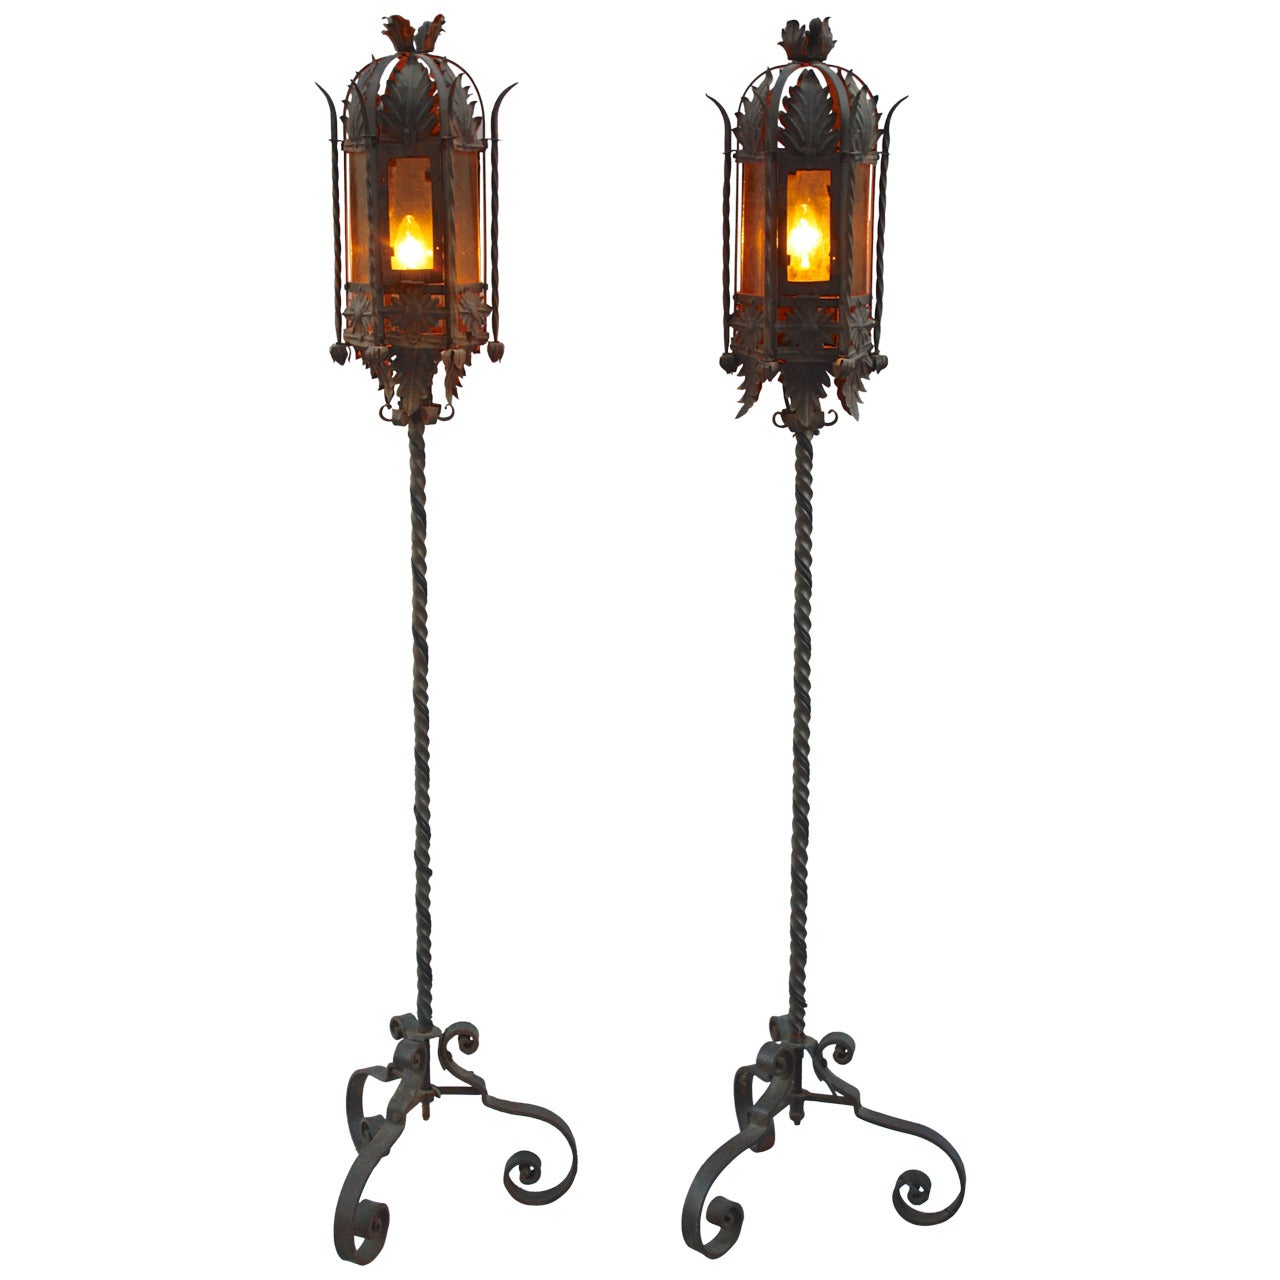 Fantastic Pair of 1920s Wrought Iron Torchieres